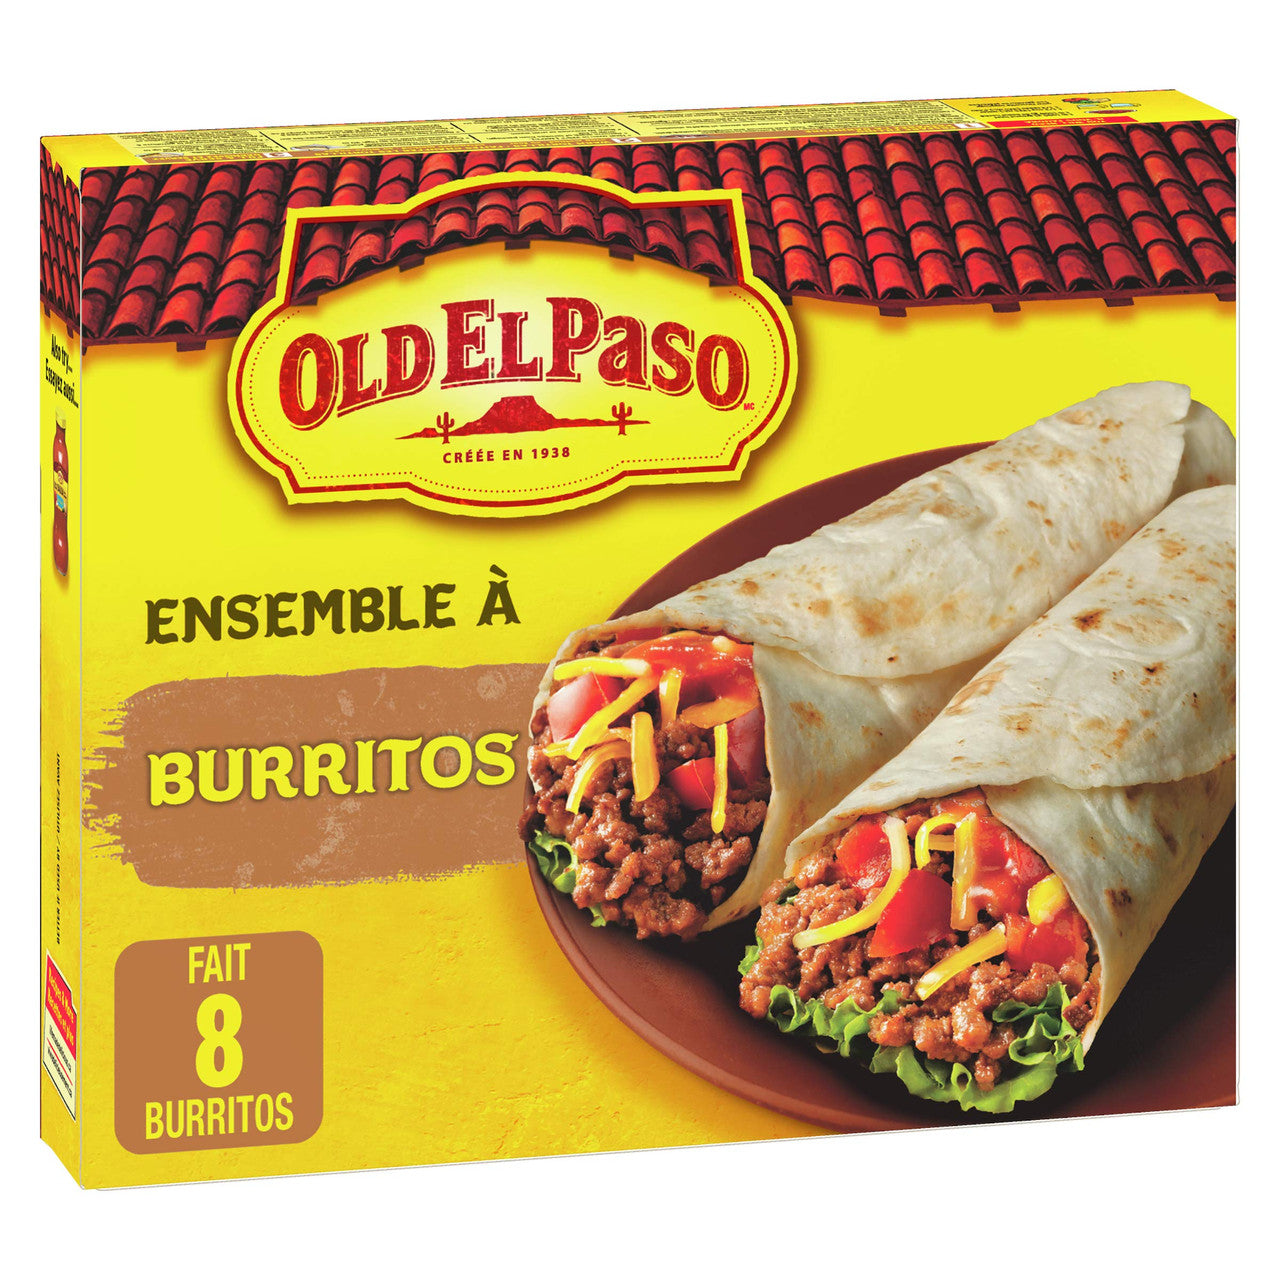 Old El Paso Burrito Dinner Kit, 510g/18 oz., 8 per box, (12 Pack) {Imported from Canada}